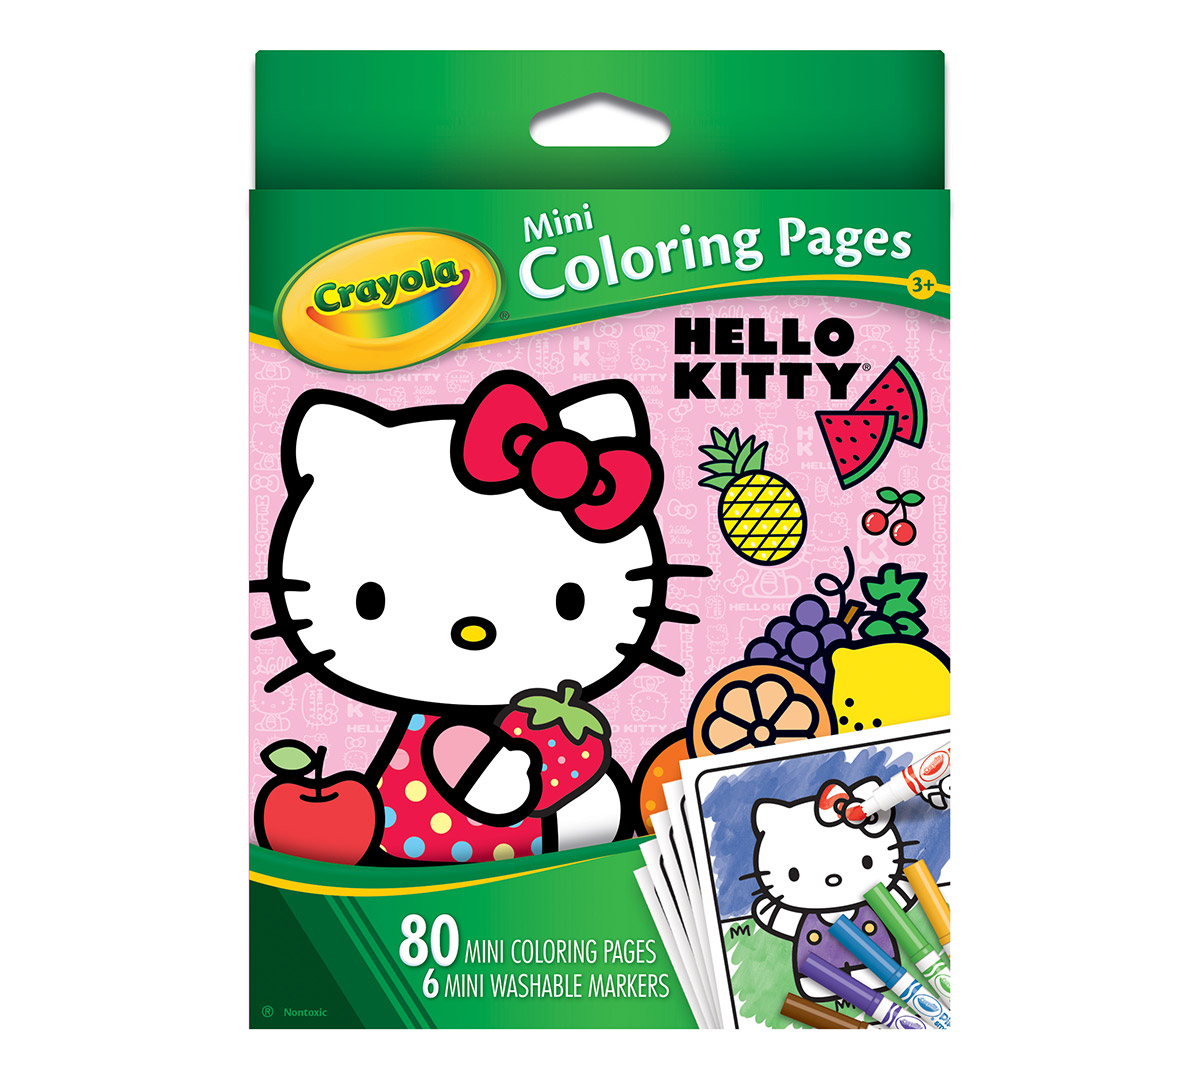 Download Mini Coloring Pages Hello Kitty | Crayola